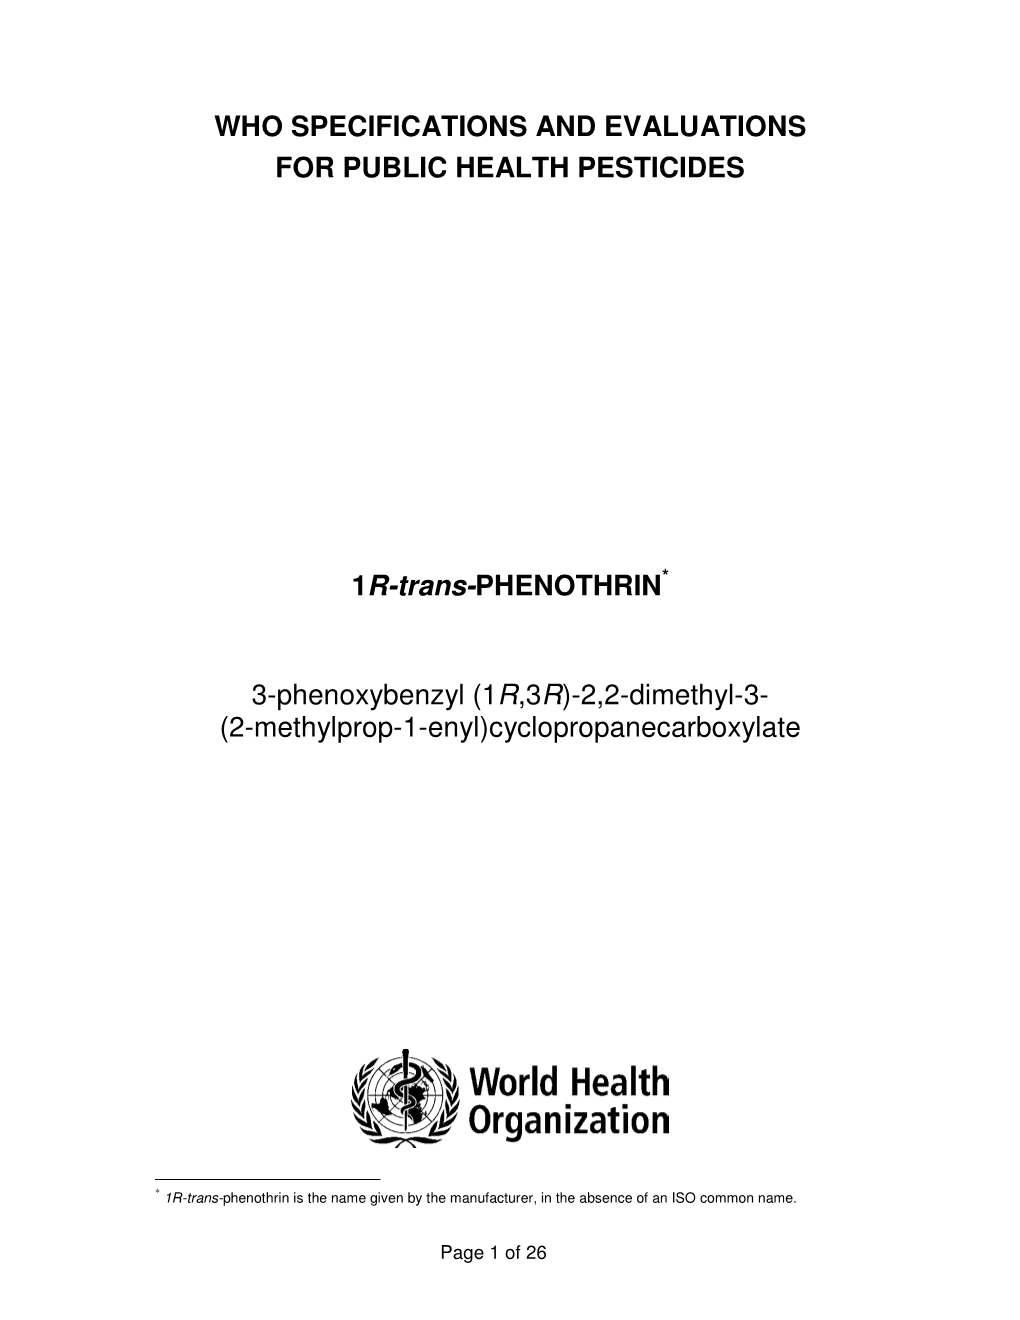 Who Specifications and Evaluations for Public Health Pesticides